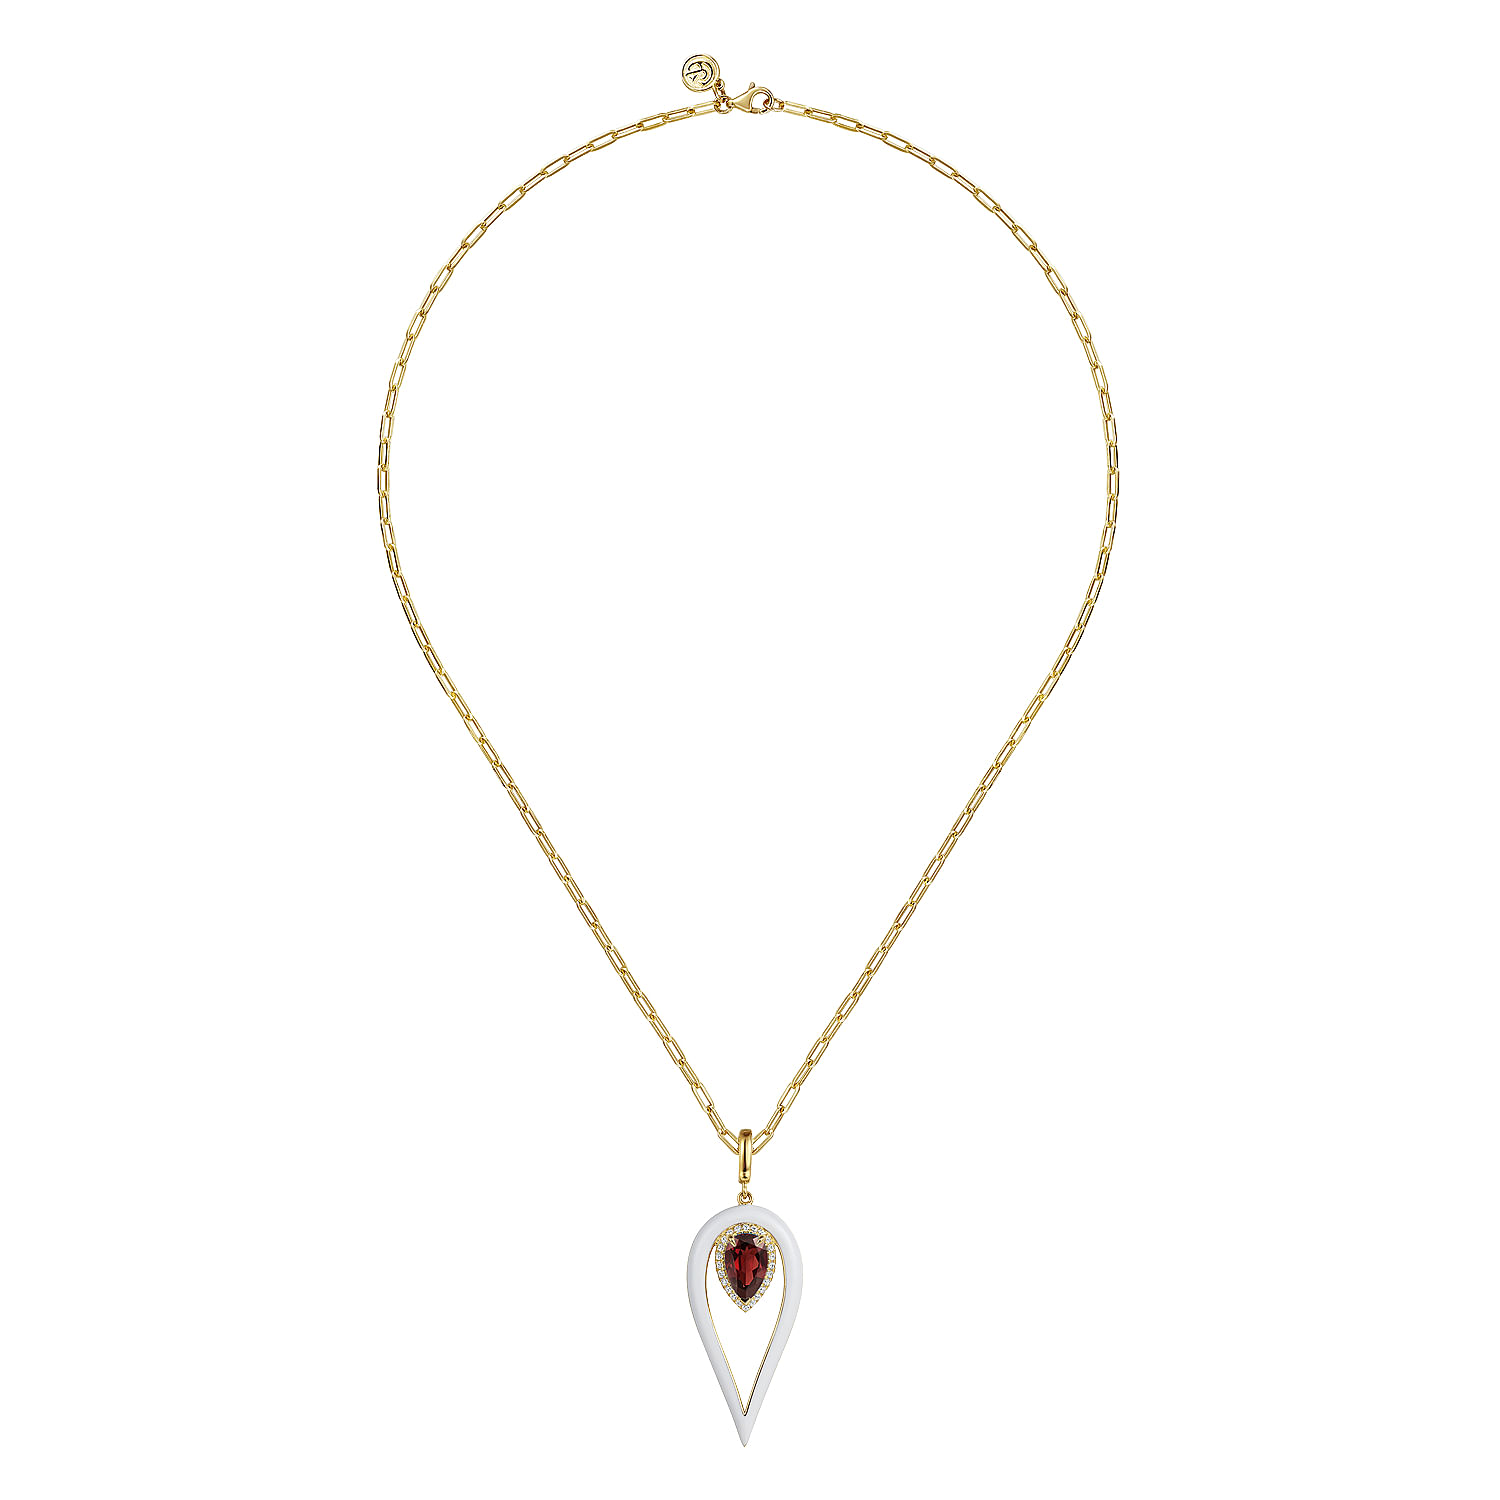 14K Yellow Gold Diamond and Garnet Long Pear Shape Drop Necklace With White Enamel